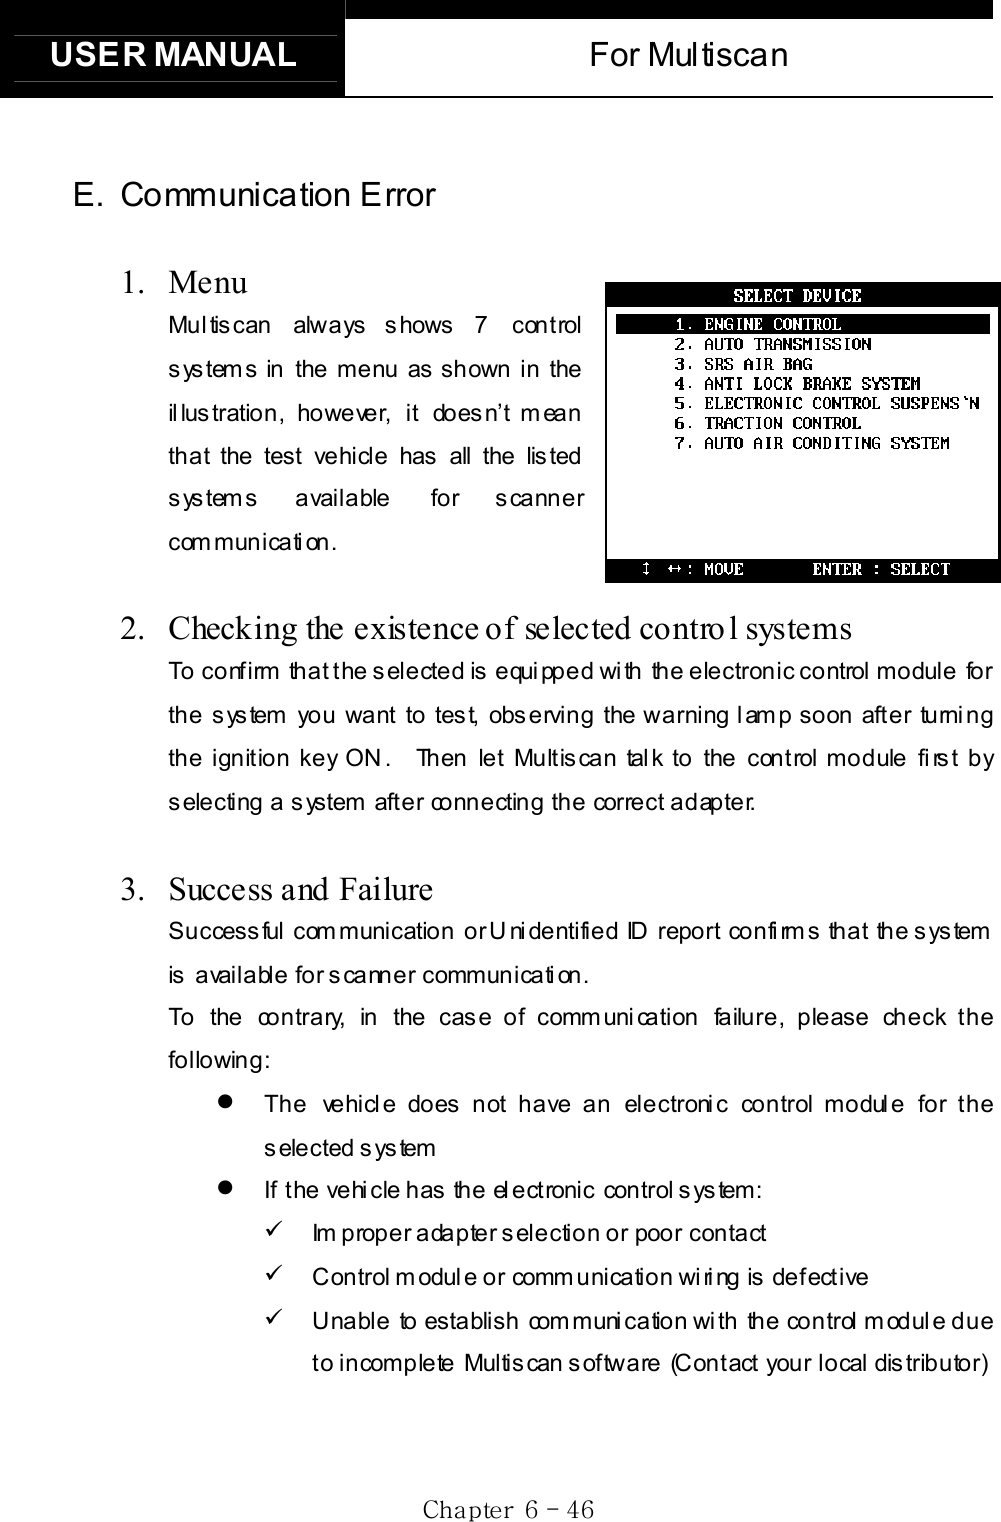 USER MANUAL  For Multiscan Gj G]G TG[]GE. Communication Error 1. Menu Mul tis can always s hows  7 control s ys tem s  in the menu as  shown in the il lus tration, however, it does n’t m ean that the test vehicle has all the lis ted systems available  for scanner communication. 2.  Checking the existence of selected contro l systems To confirm that the selected is equipped with the electronic control module for the system you want to test, observing the warning lamp soon after turning the ignition key ON.  Then let Multiscan talk to the control module first by selecting a system after connecting the correct adapter.     3. Success and FailureSuccessful communication or Unidentified ID report confirms that the system is available for scanner communication.     To the contrary, in the case of communication failure, please check the following: z The vehicle does not have an electronic control module for the selected system   z If the vehicle has the electronic control system: 9 Im proper adapter selection or poor contact 9 Control module or communication wiring is defective 9 Unable to establish communication with the control module due t o i n comp le te Multis can s of twa re  (C on t act  you r local  dis trib utor) 